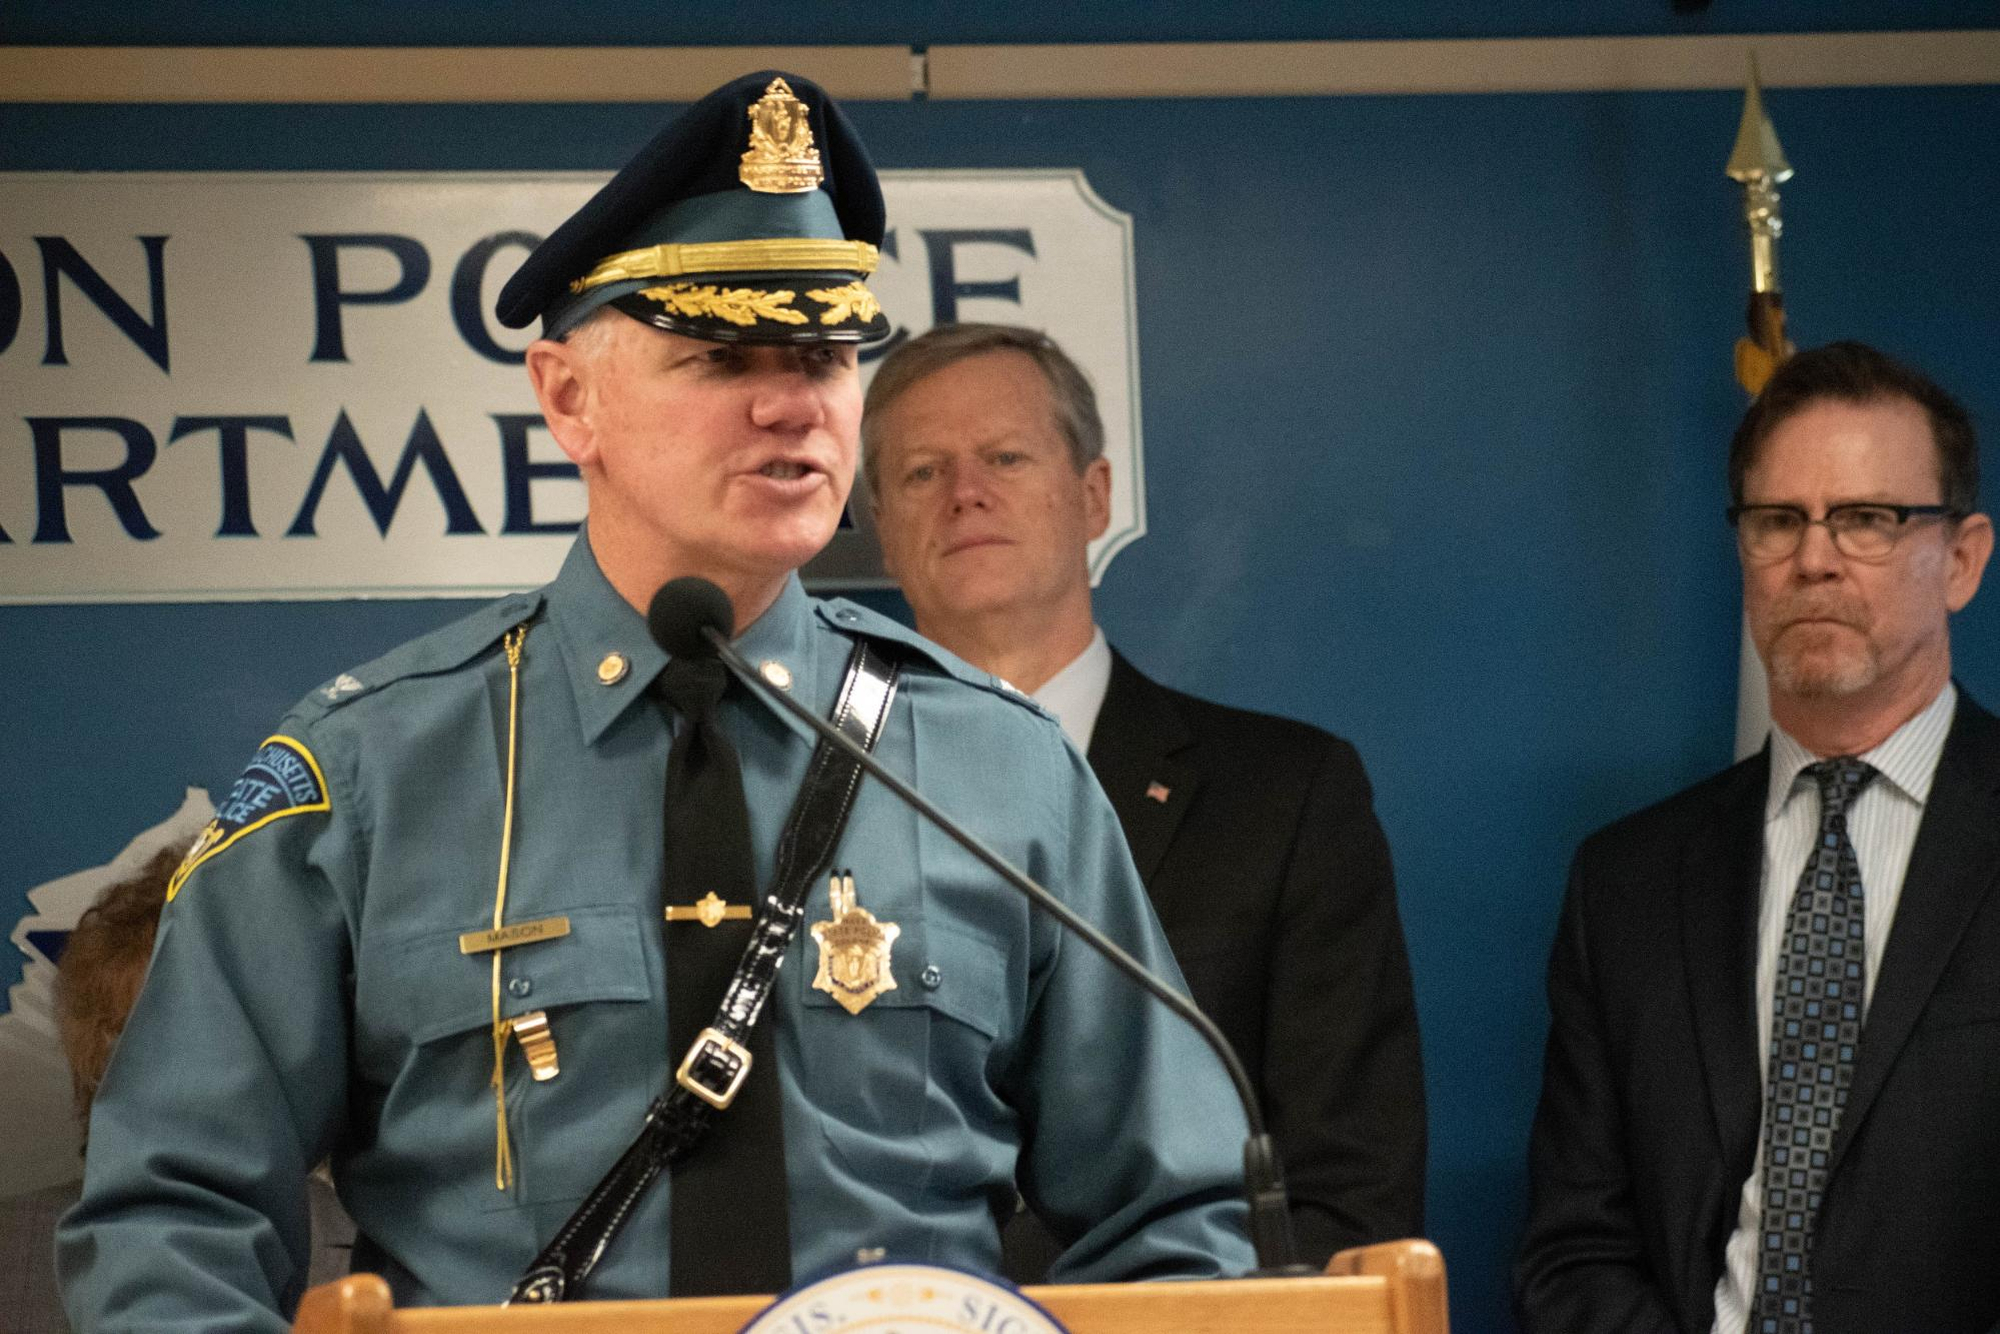 State Police Colonel Tasked With Reform Is Accused Of Breaking Rules To